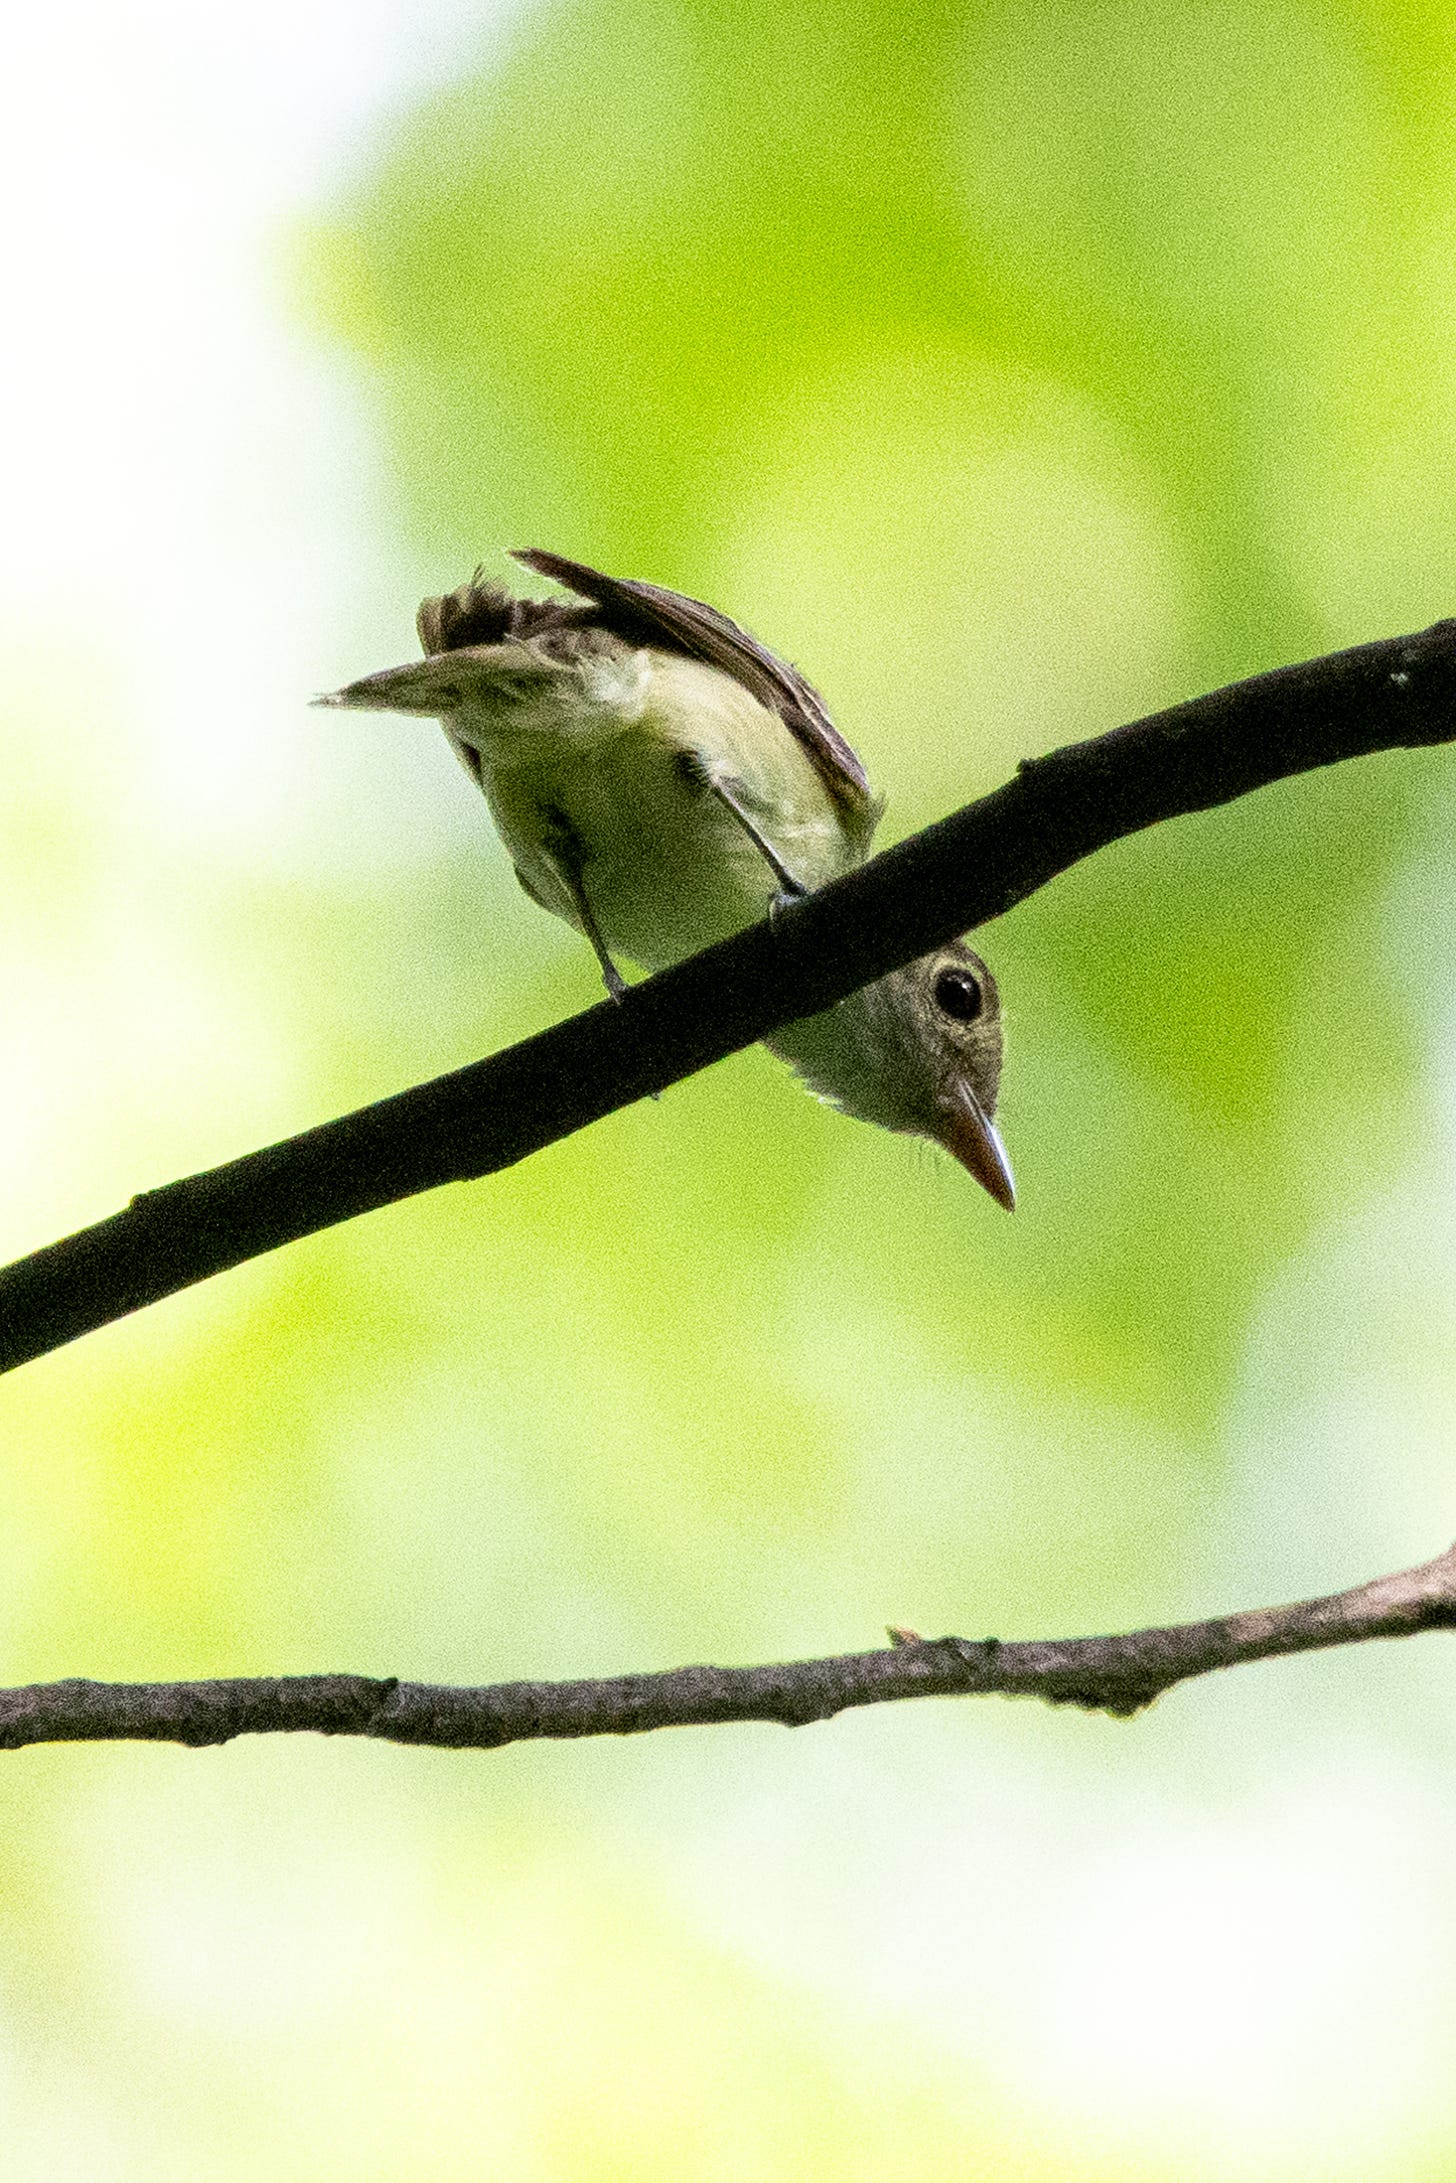 A small, big-eyed Acadian flycatcher, facing away from the viewer, is leaning so far forward on a branch that its head is beneath the branch and one eye looks back at the viewer